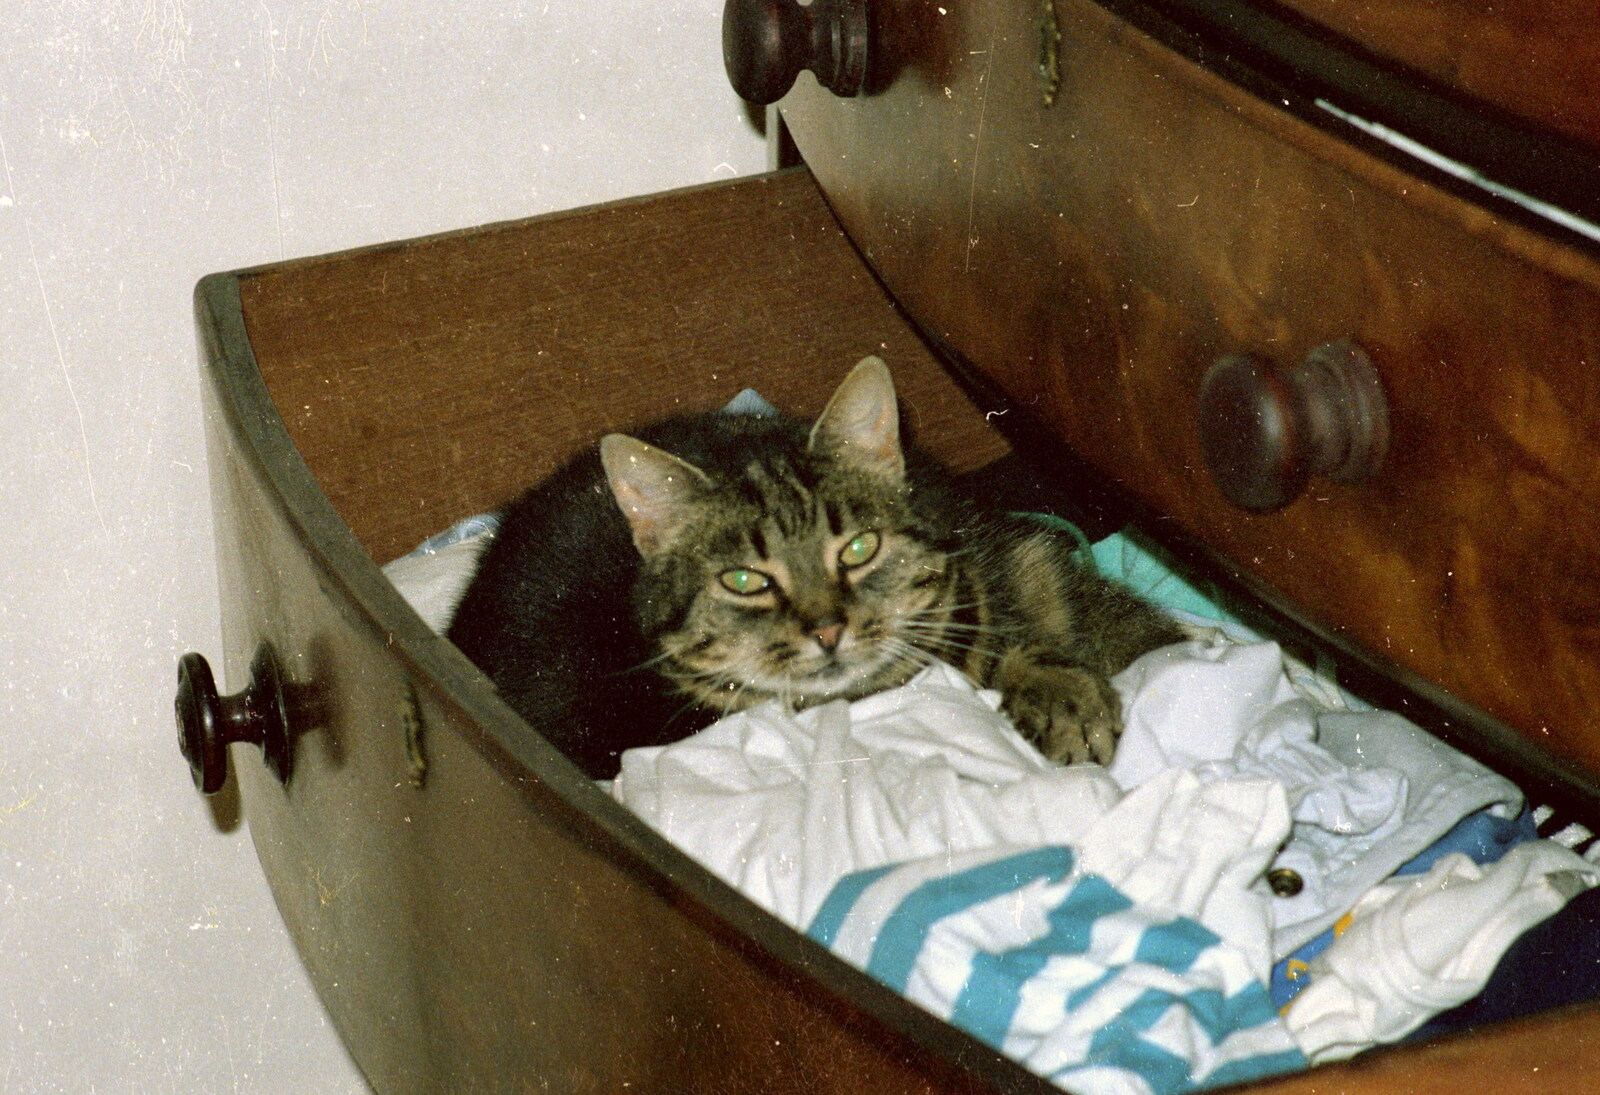 Florence nests in a drawer from Brockenhurst College Presentation and Christmas, Hampshire - 19th December 1985